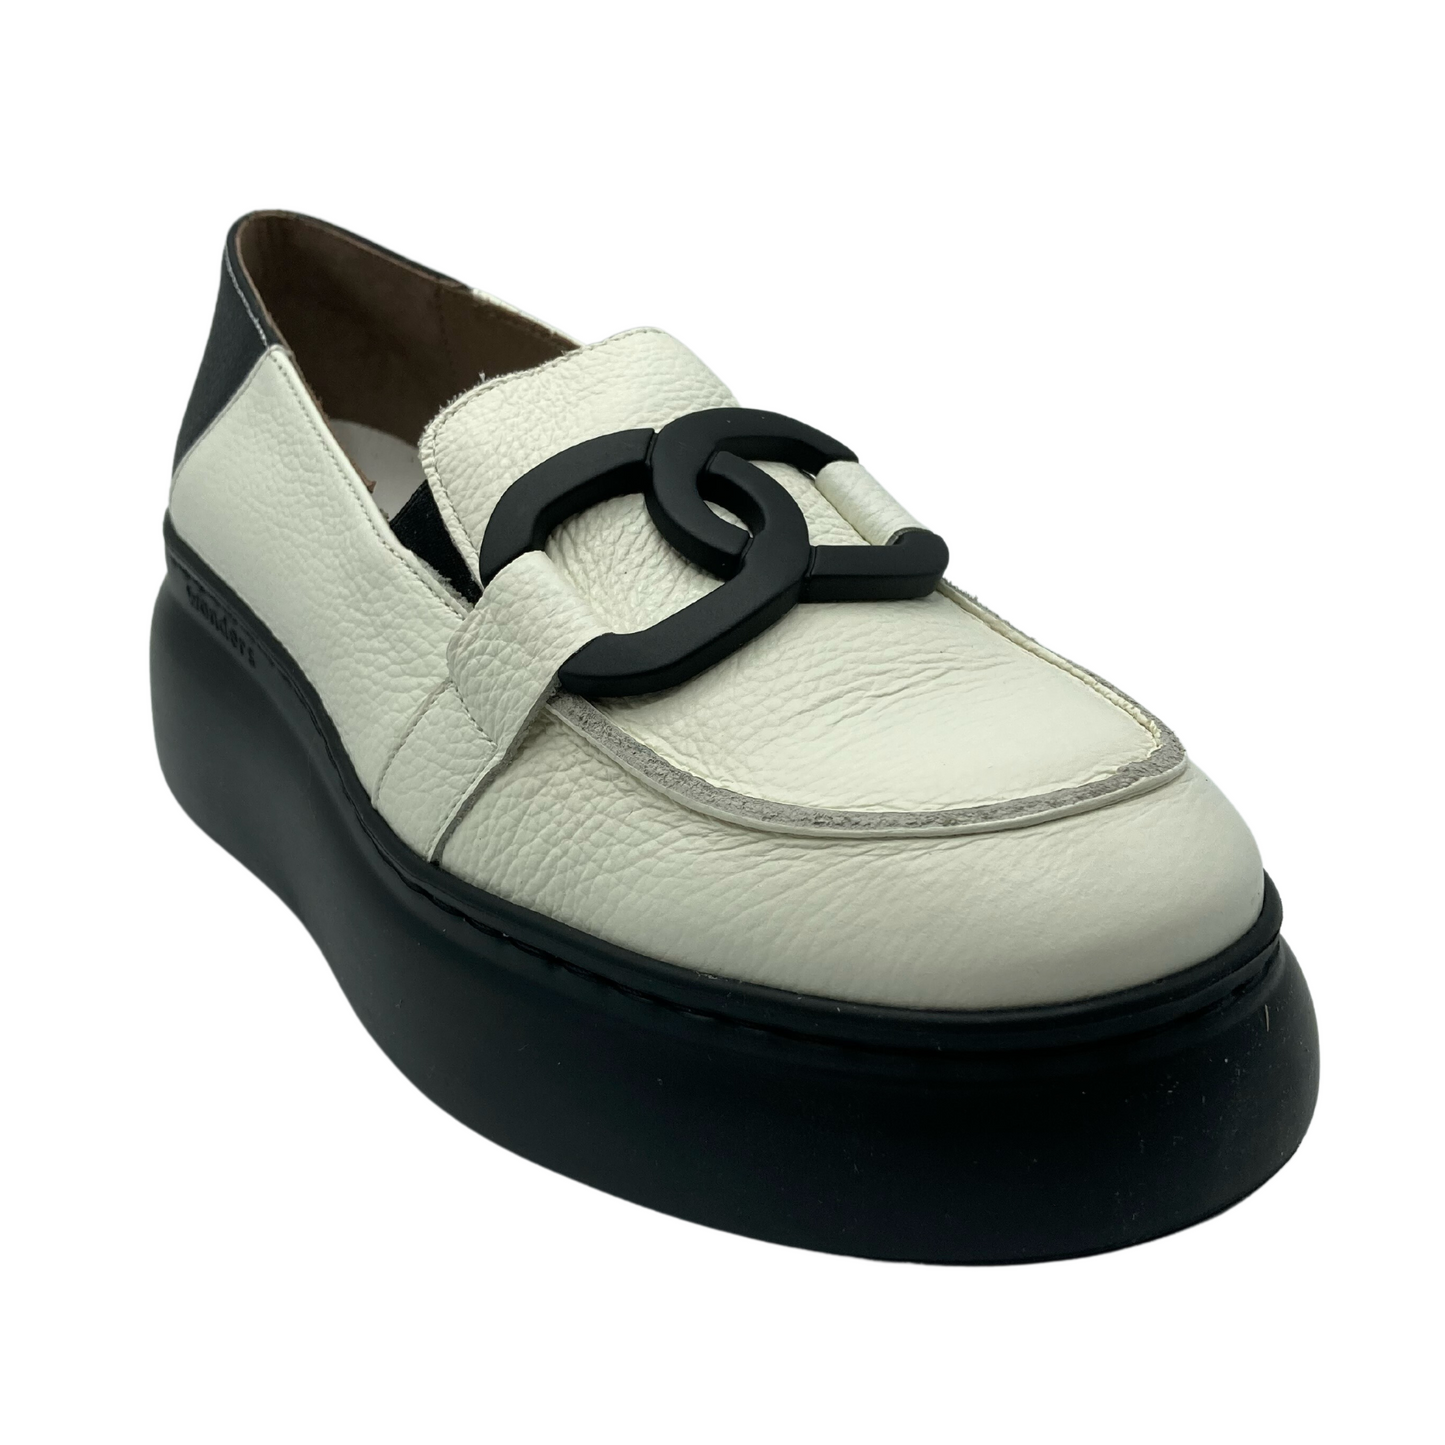 Angled view of white leather loafer with black buckled detail and black sole